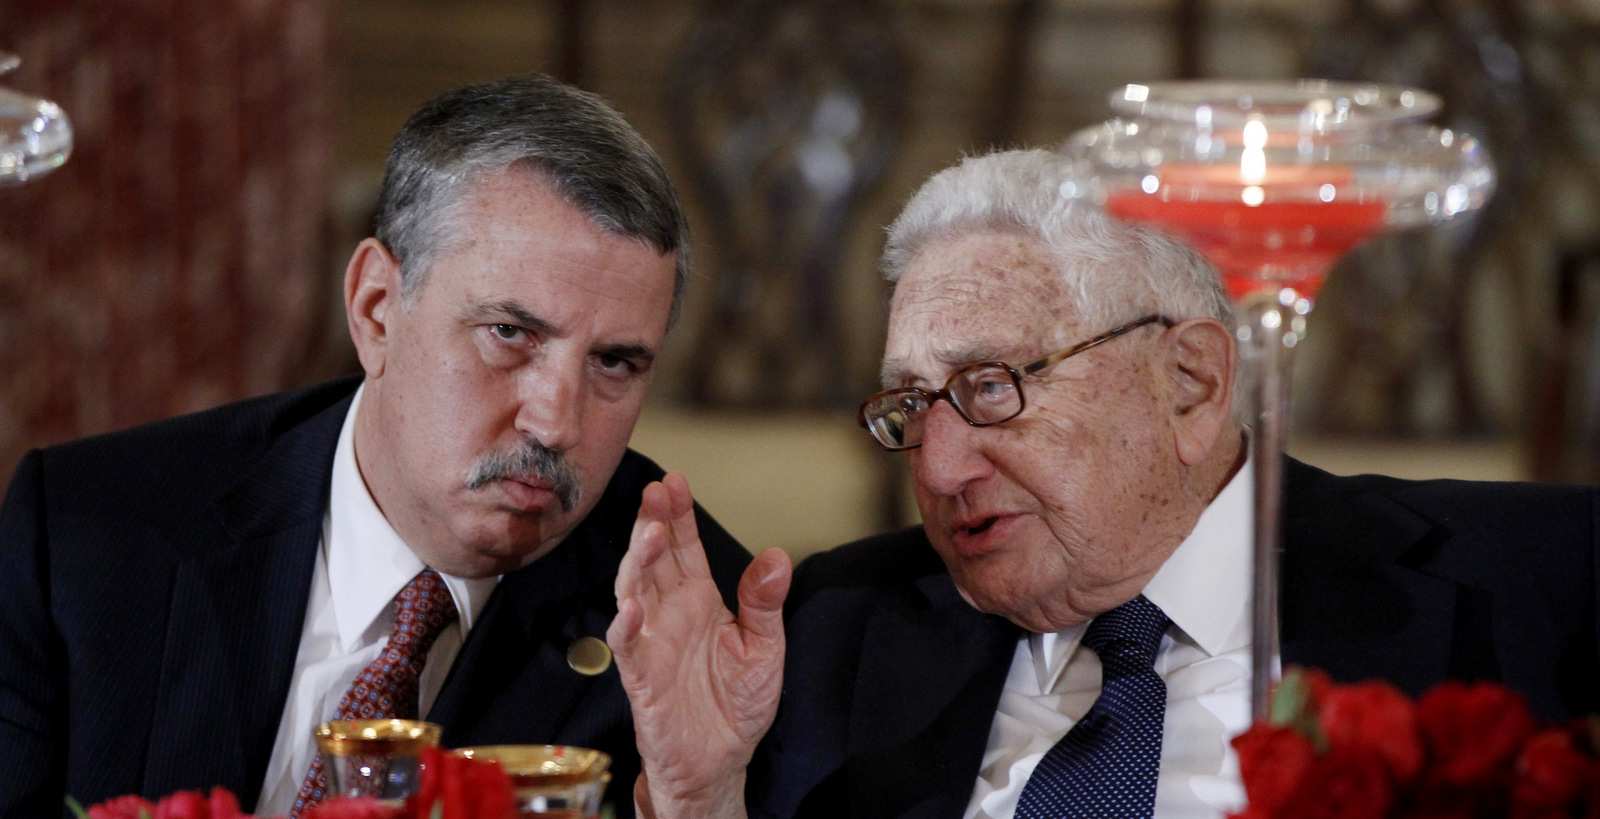 New York Times columnist Thomas L. Friedman, left, talks with former Secretary of State Henry Kissinger during a lunch for Chinese Vice President Xi Jinping, Feb. 14, 2012, at the State Department in Washington. (AP/Charles Dharapak)